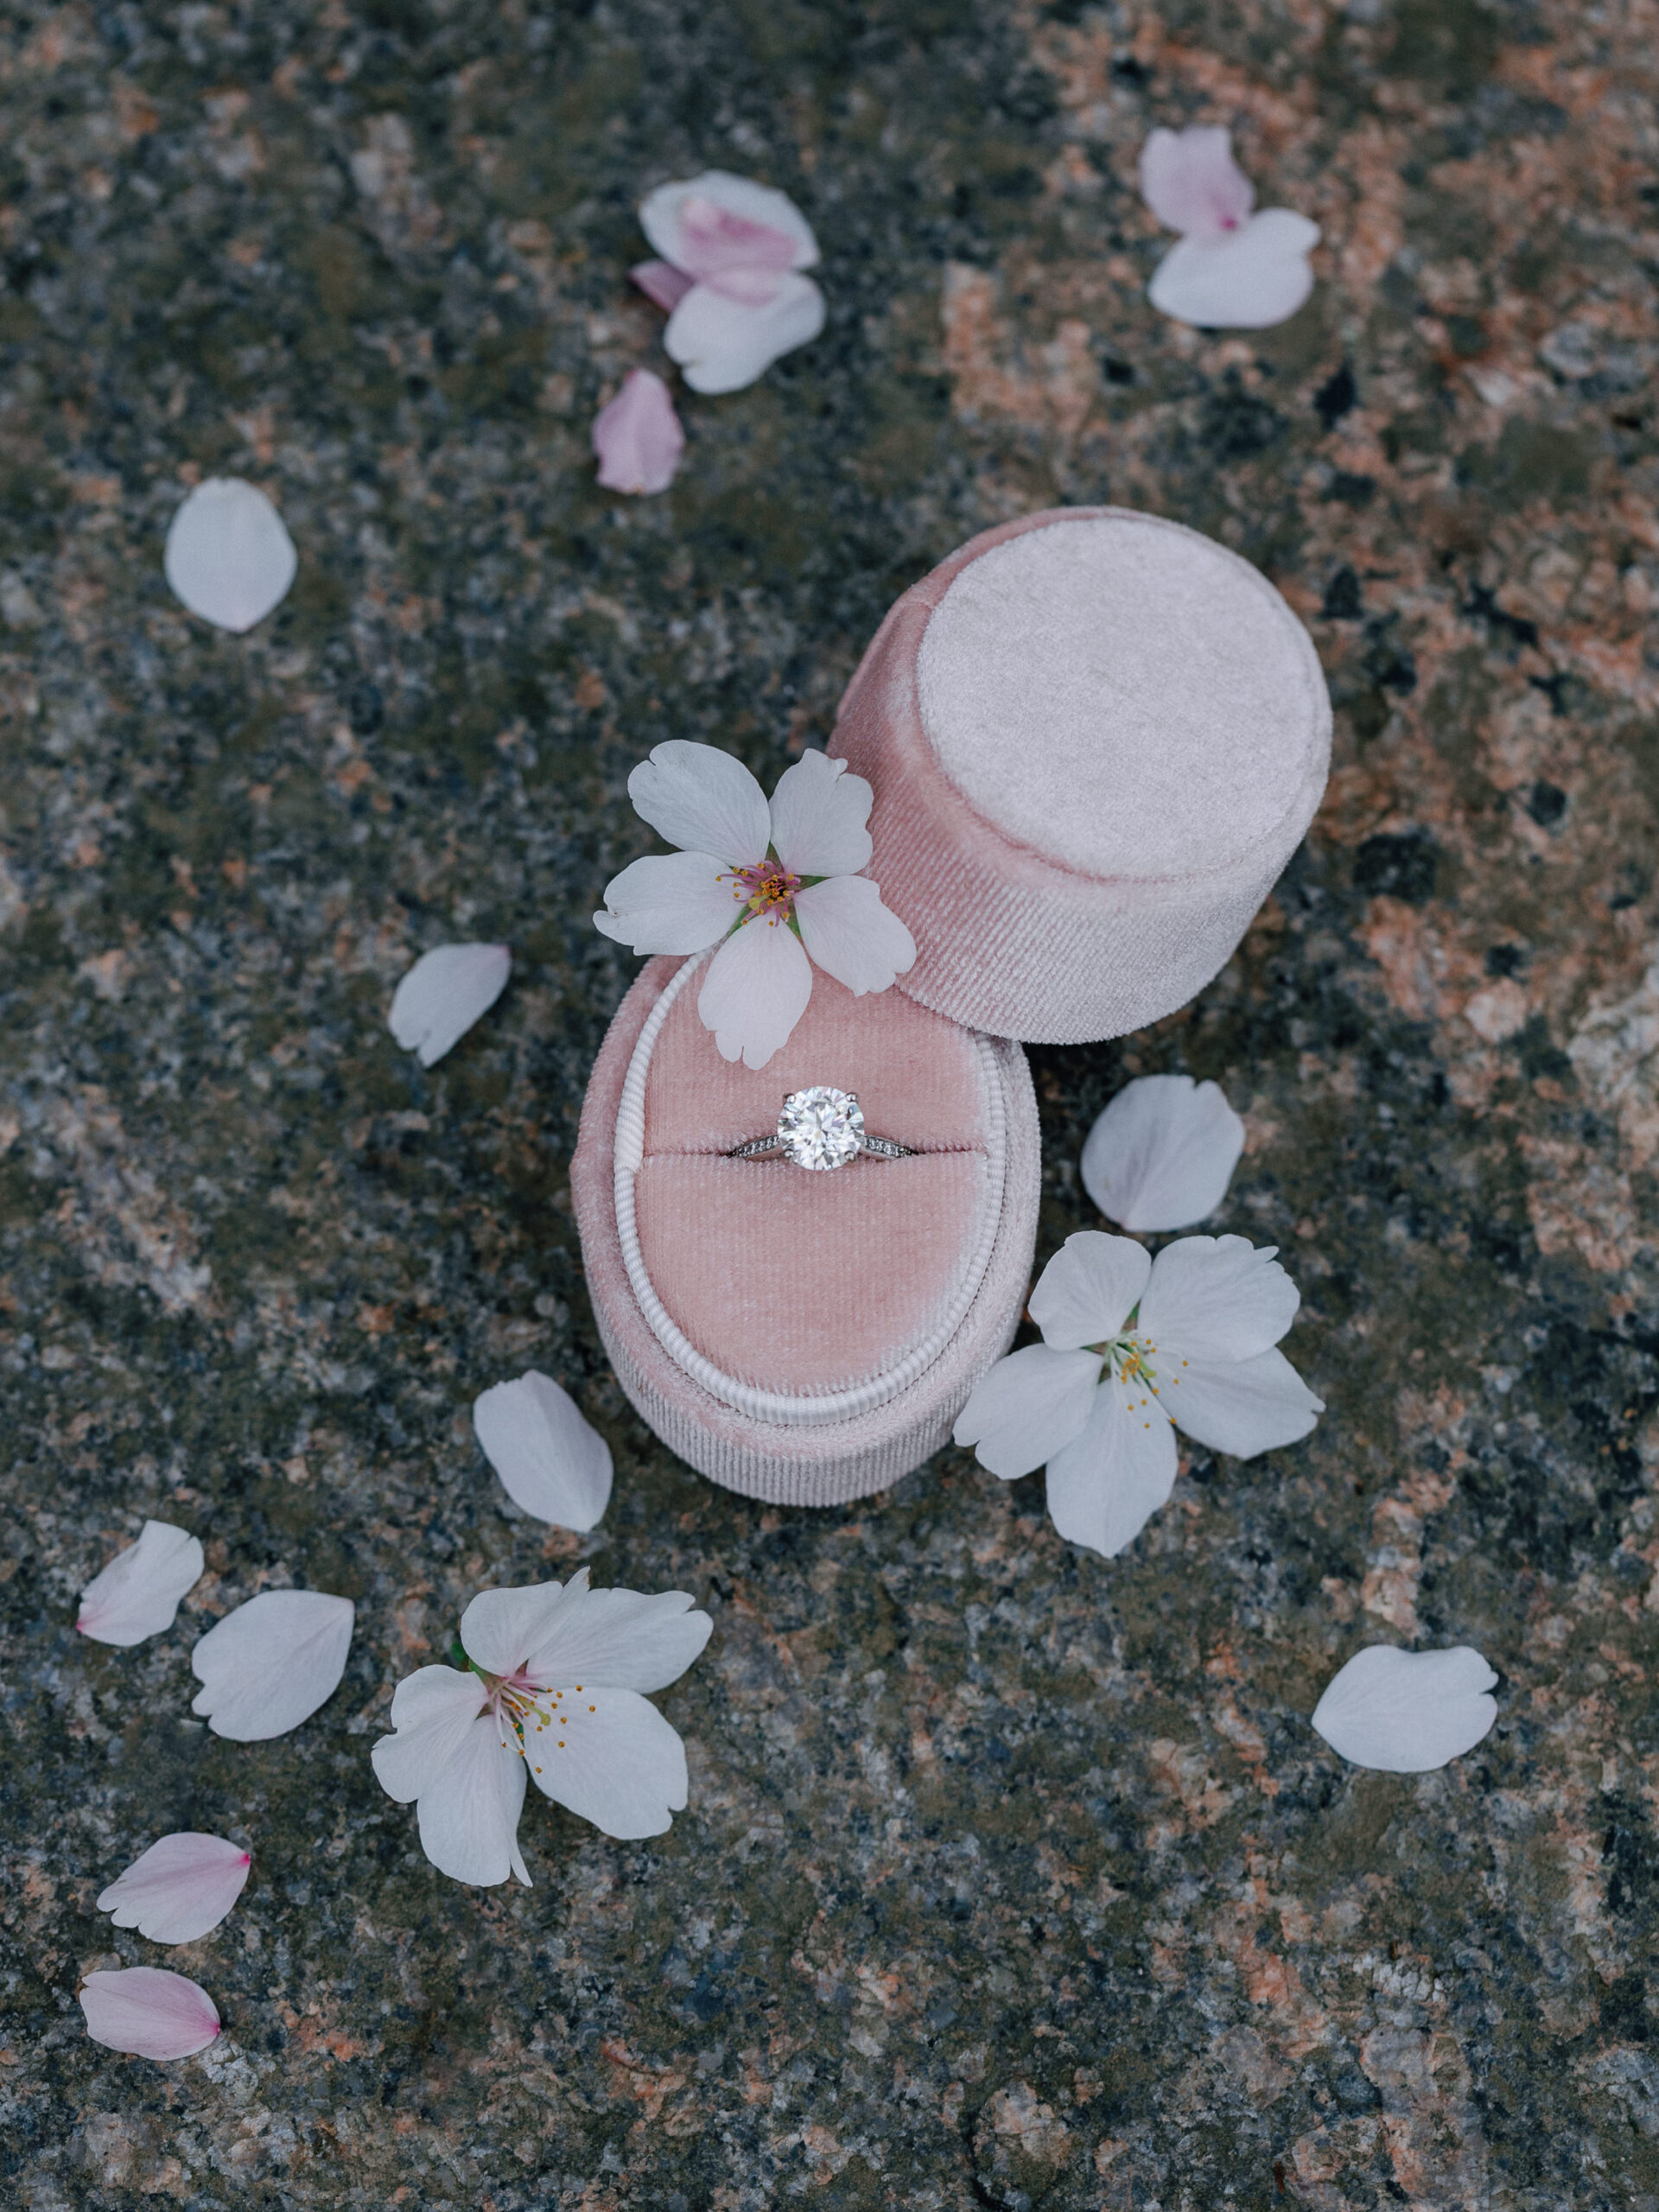 An engagement ring surrounded by cherry blossom flowers.